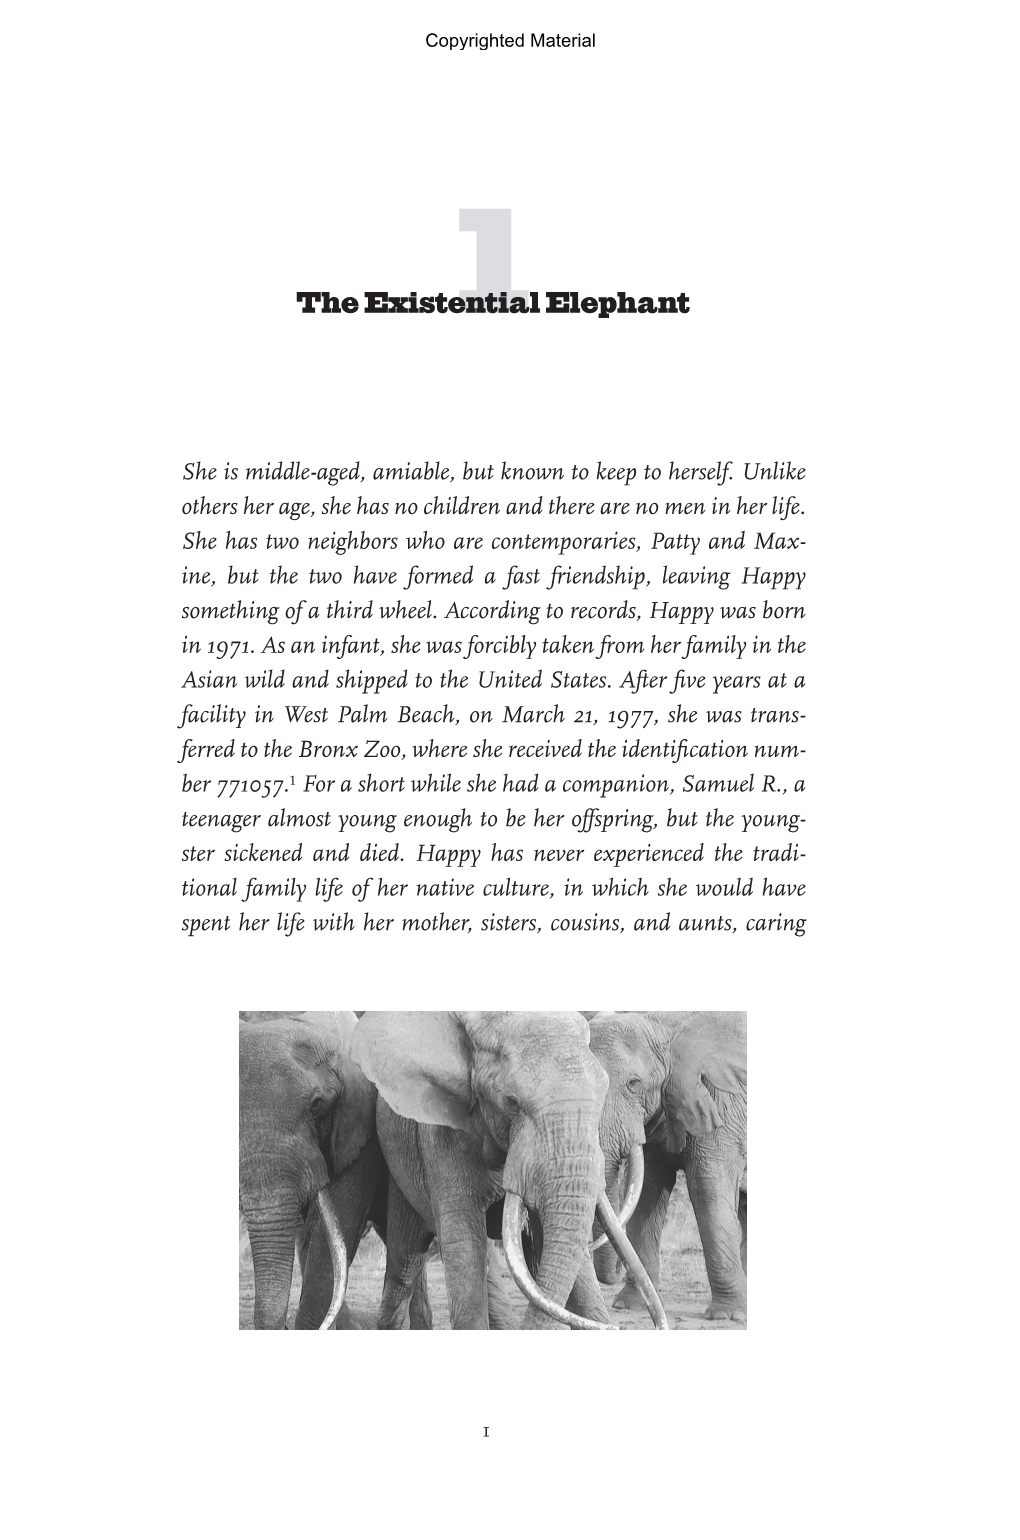 The Existential Elephant